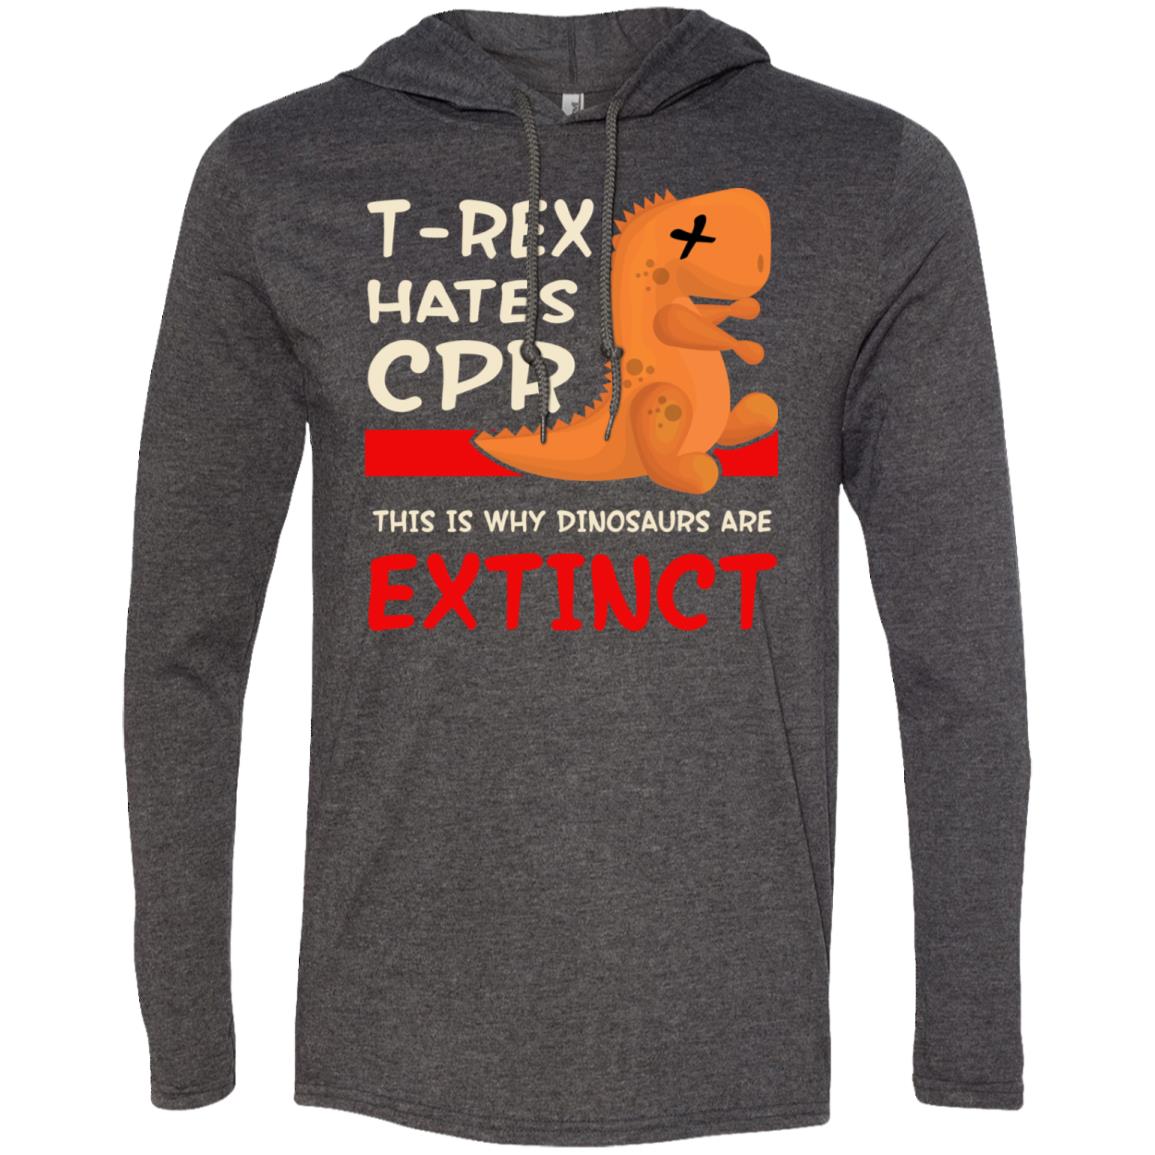 T Rex Hates Cpr This is Why Dinosaurs Are Extinct Long Sleeve Hoodie ...